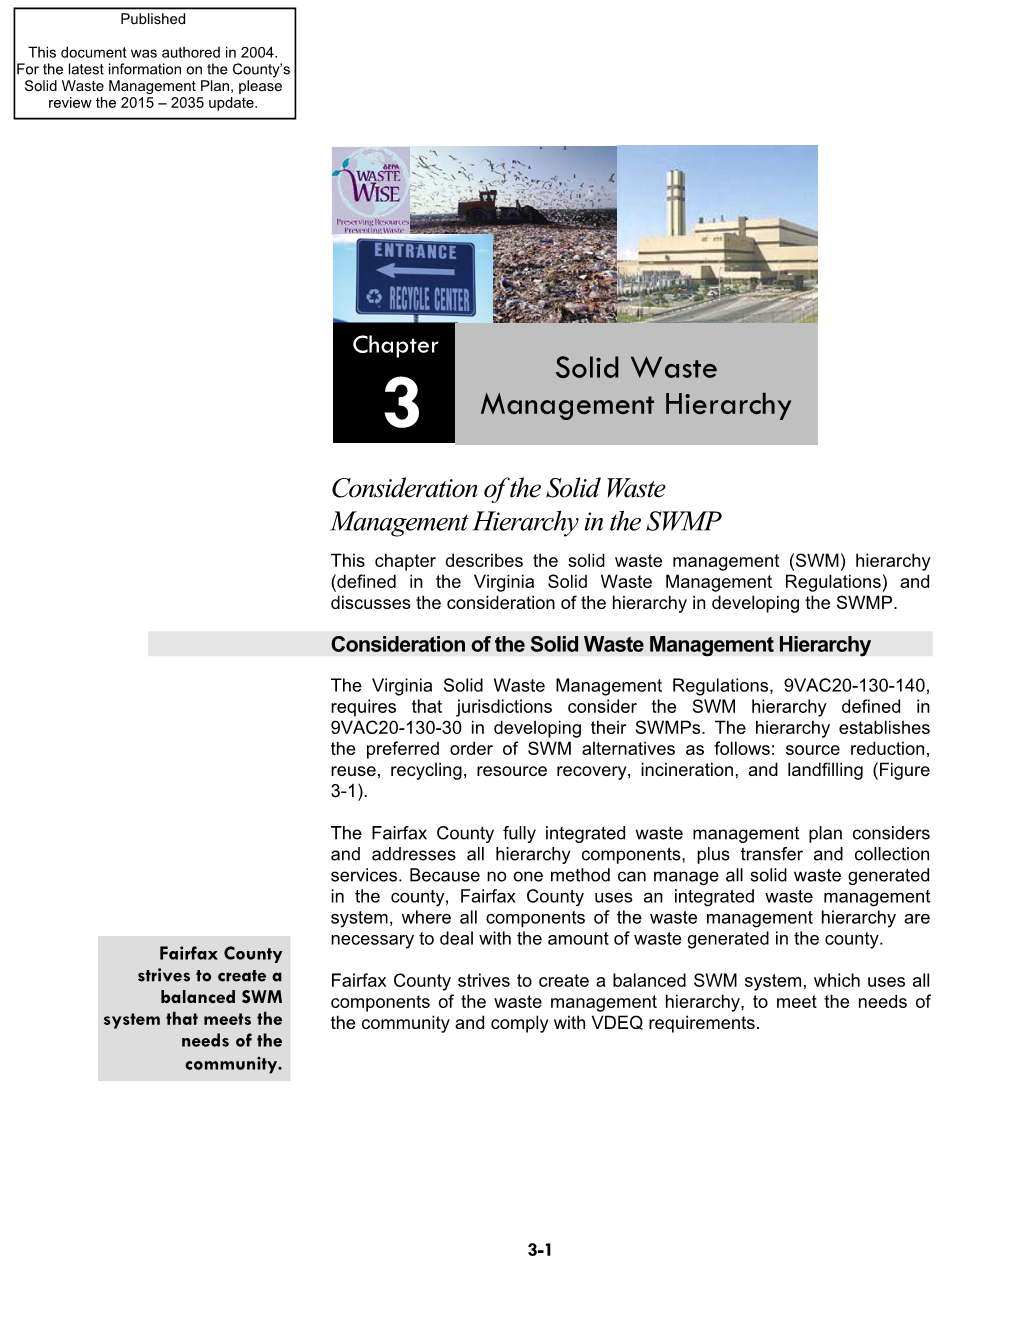 Chapter 3 - Solid Waste Management Hierarchy